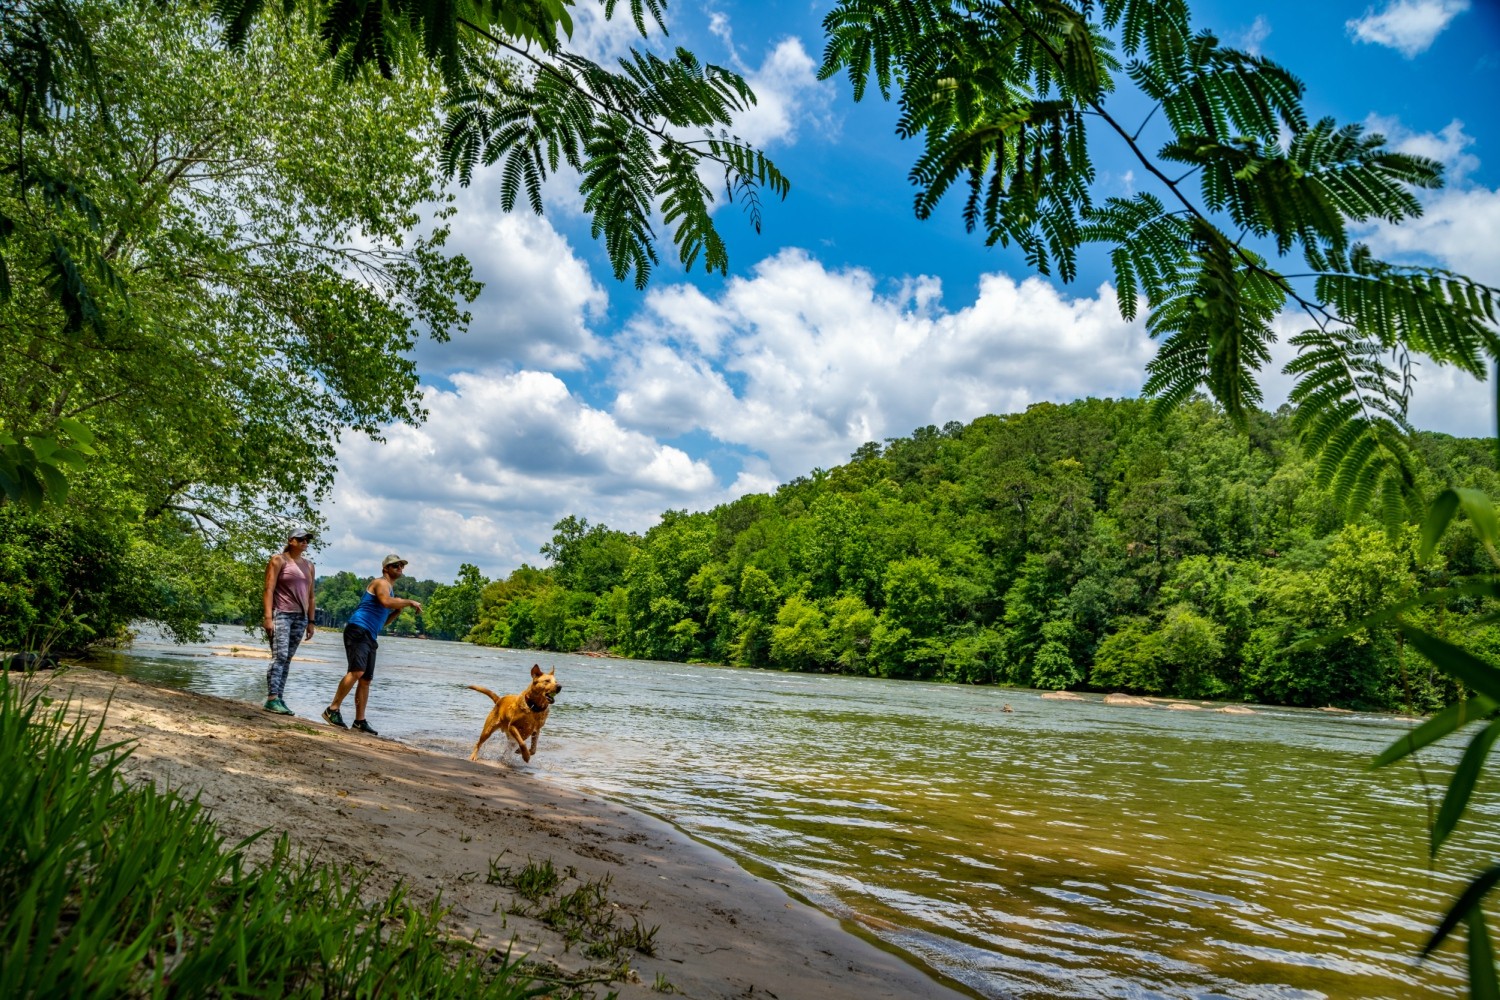 They are Dog-Friendly trails, and perfect for pedestrians, hikers, and cyclists.